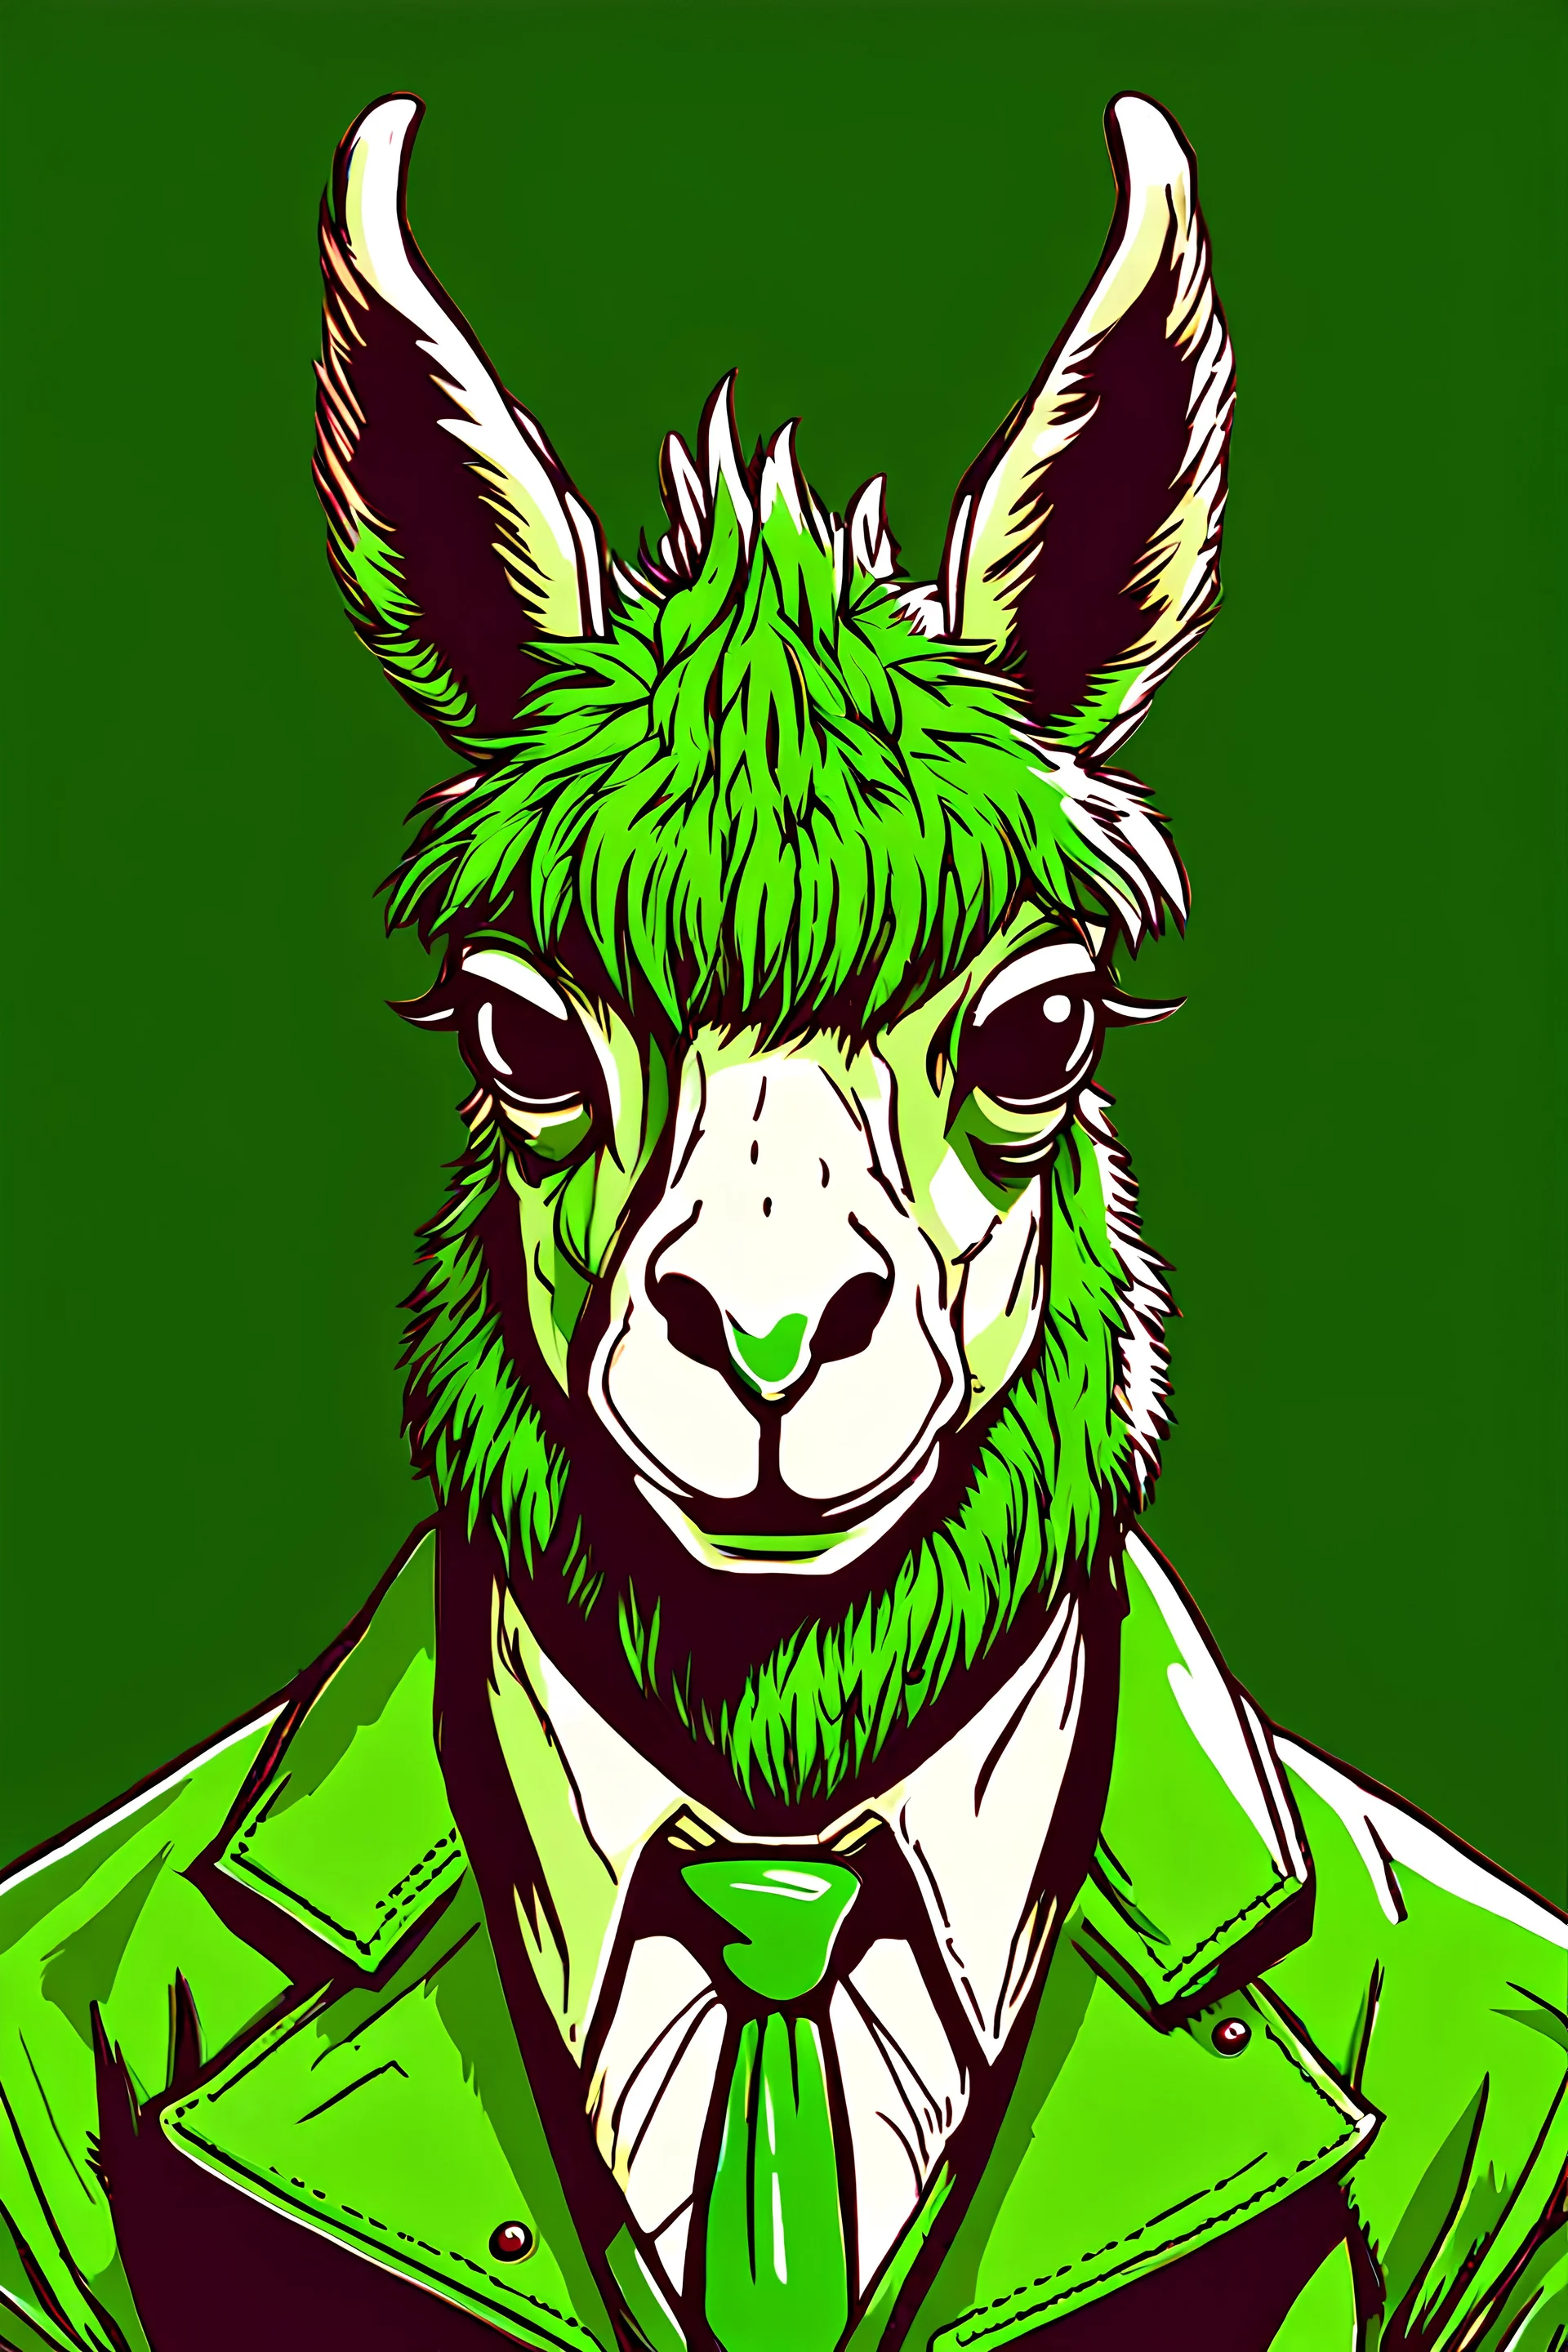 Martian Llama with green fur, green antennae, and destroyer of men's souls drawn in JoJo's Bizarre Adventure style